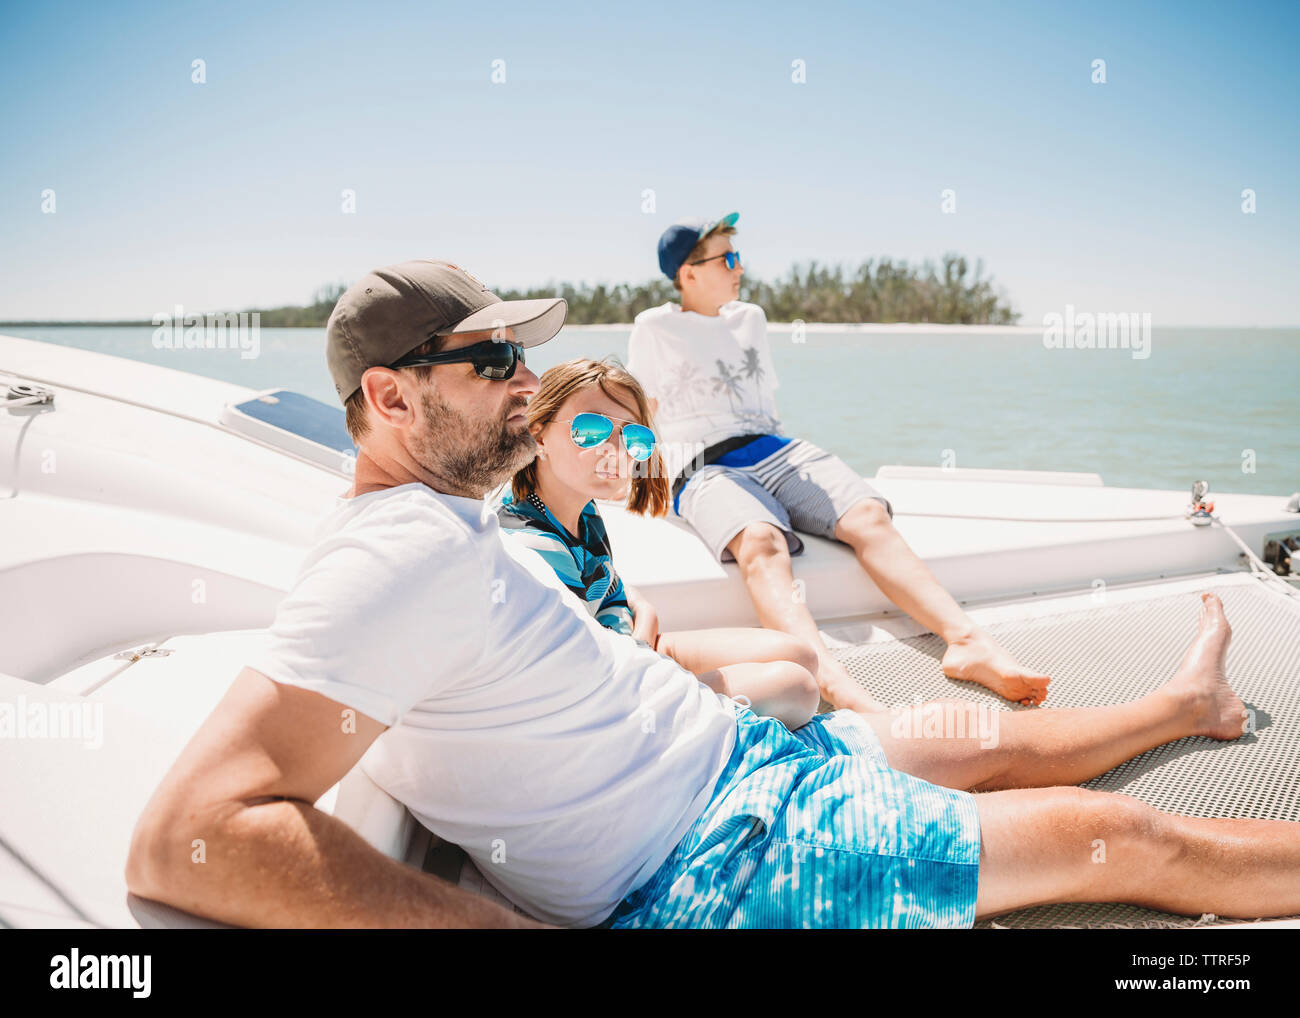 Family relaxing in boat on sea against clear sky during sunny day Stock Photo